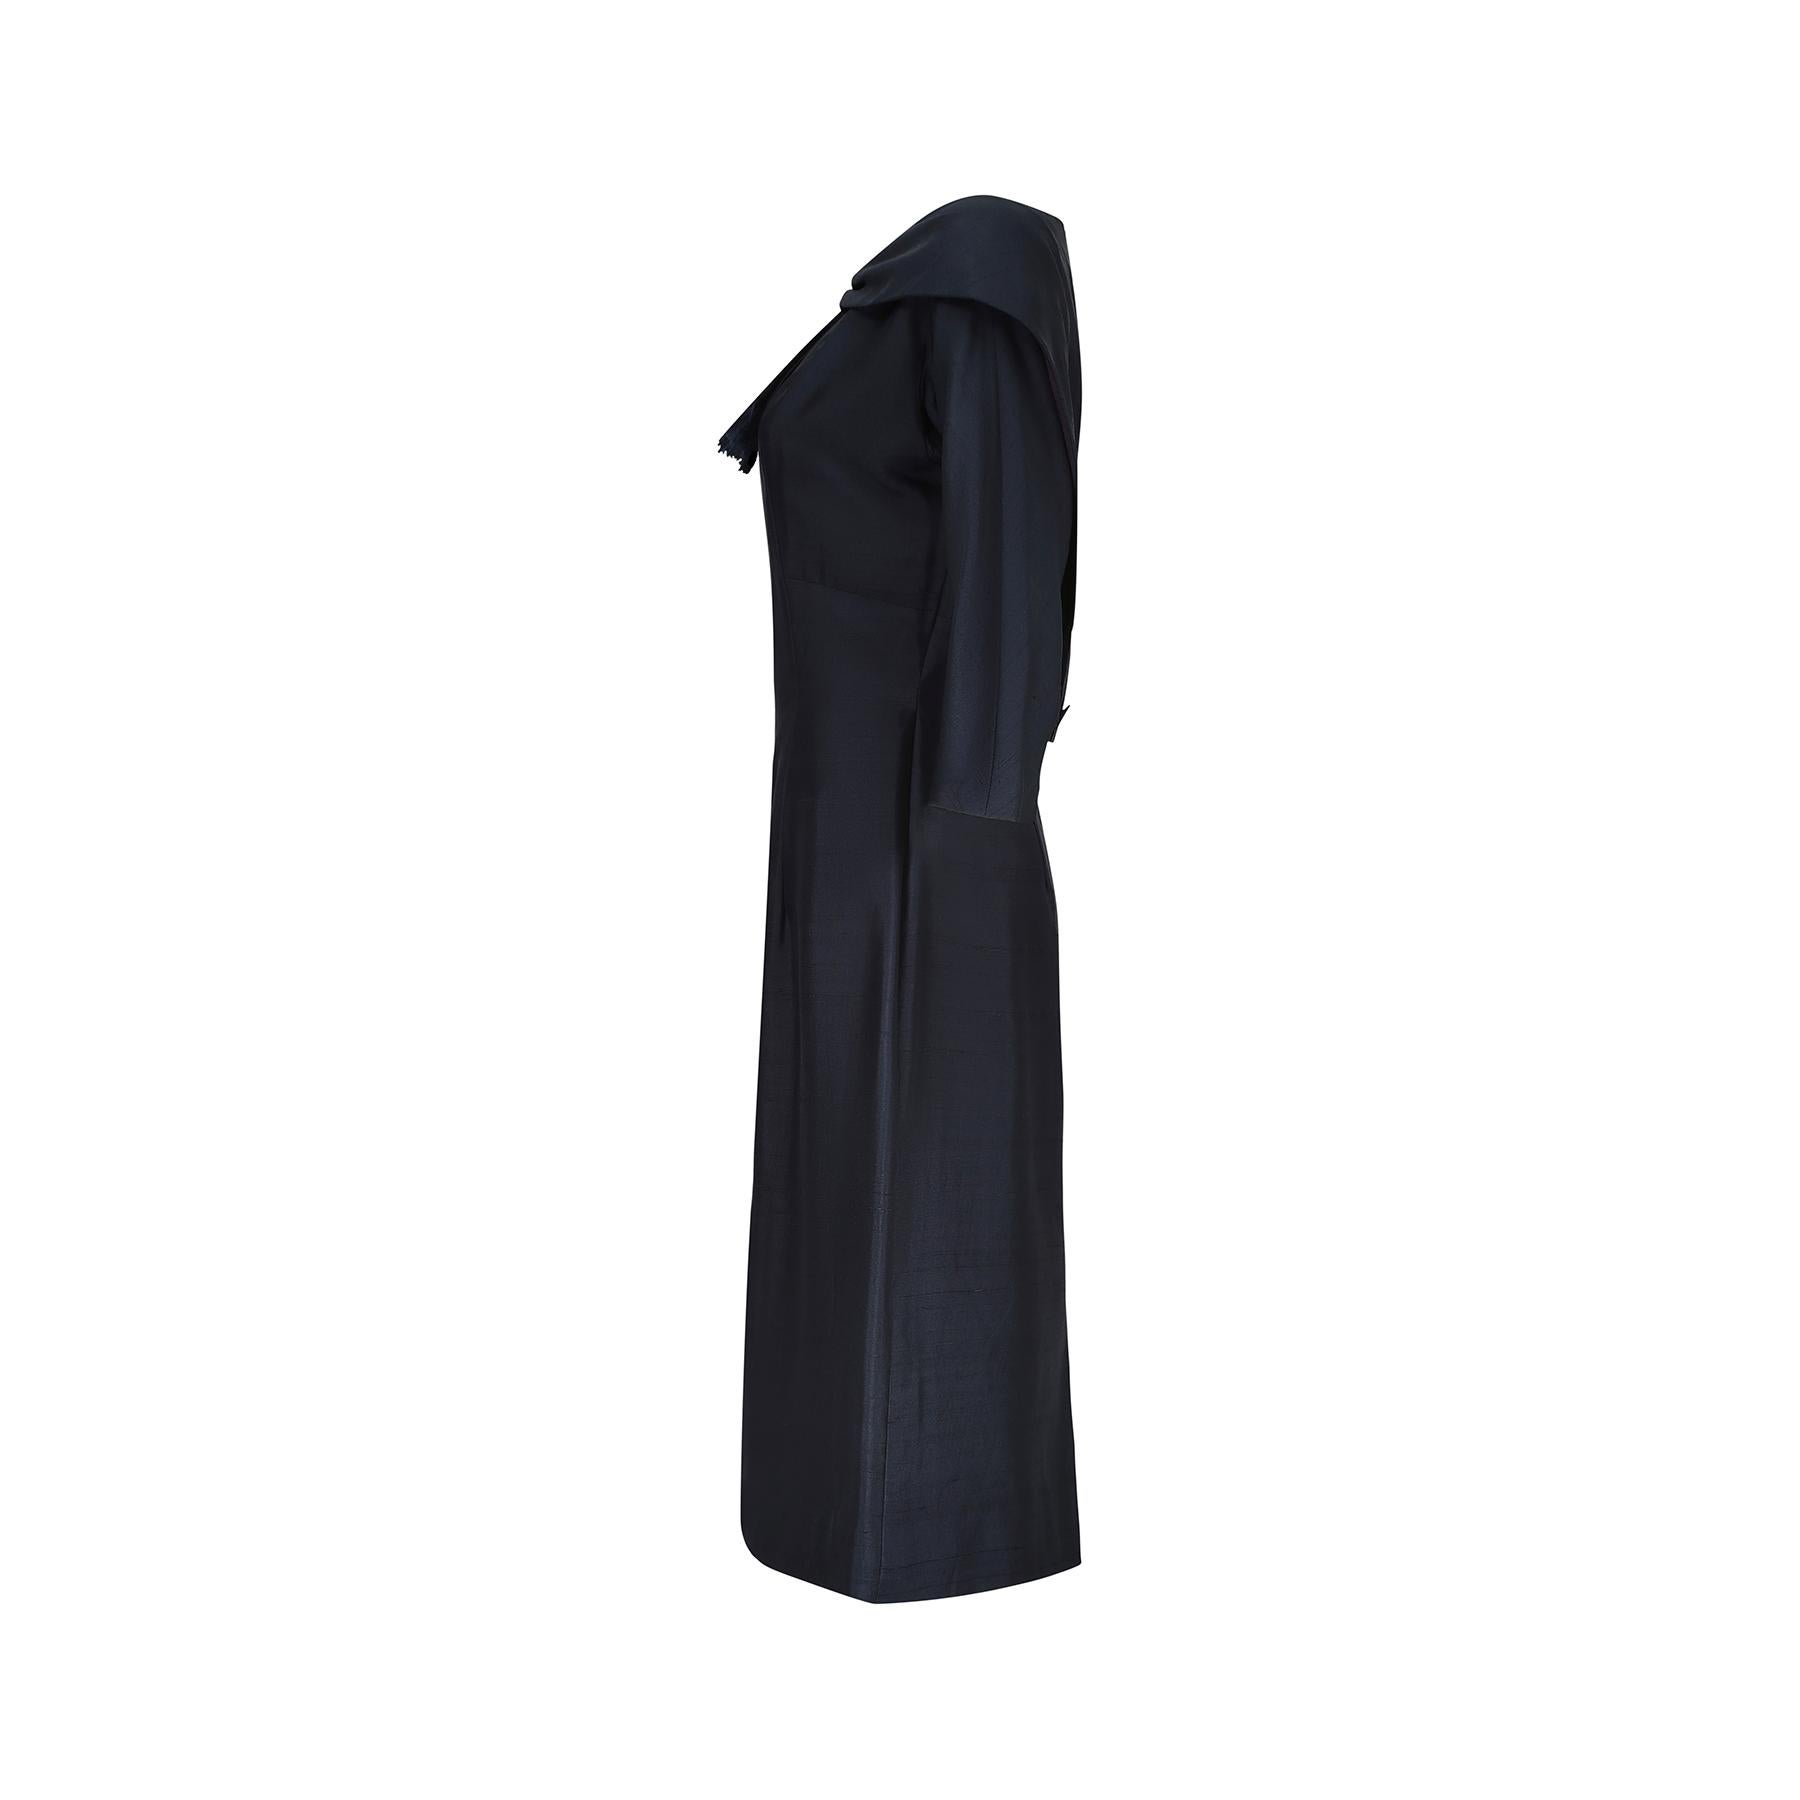 Original 1950s navy blue silk dress with a fabulously detailed shawl collar neckline that is designed to look like a capelet but is in fact integral to the dress. The faux tie detail at the front has these unusual 'frayed' ends designed to look like